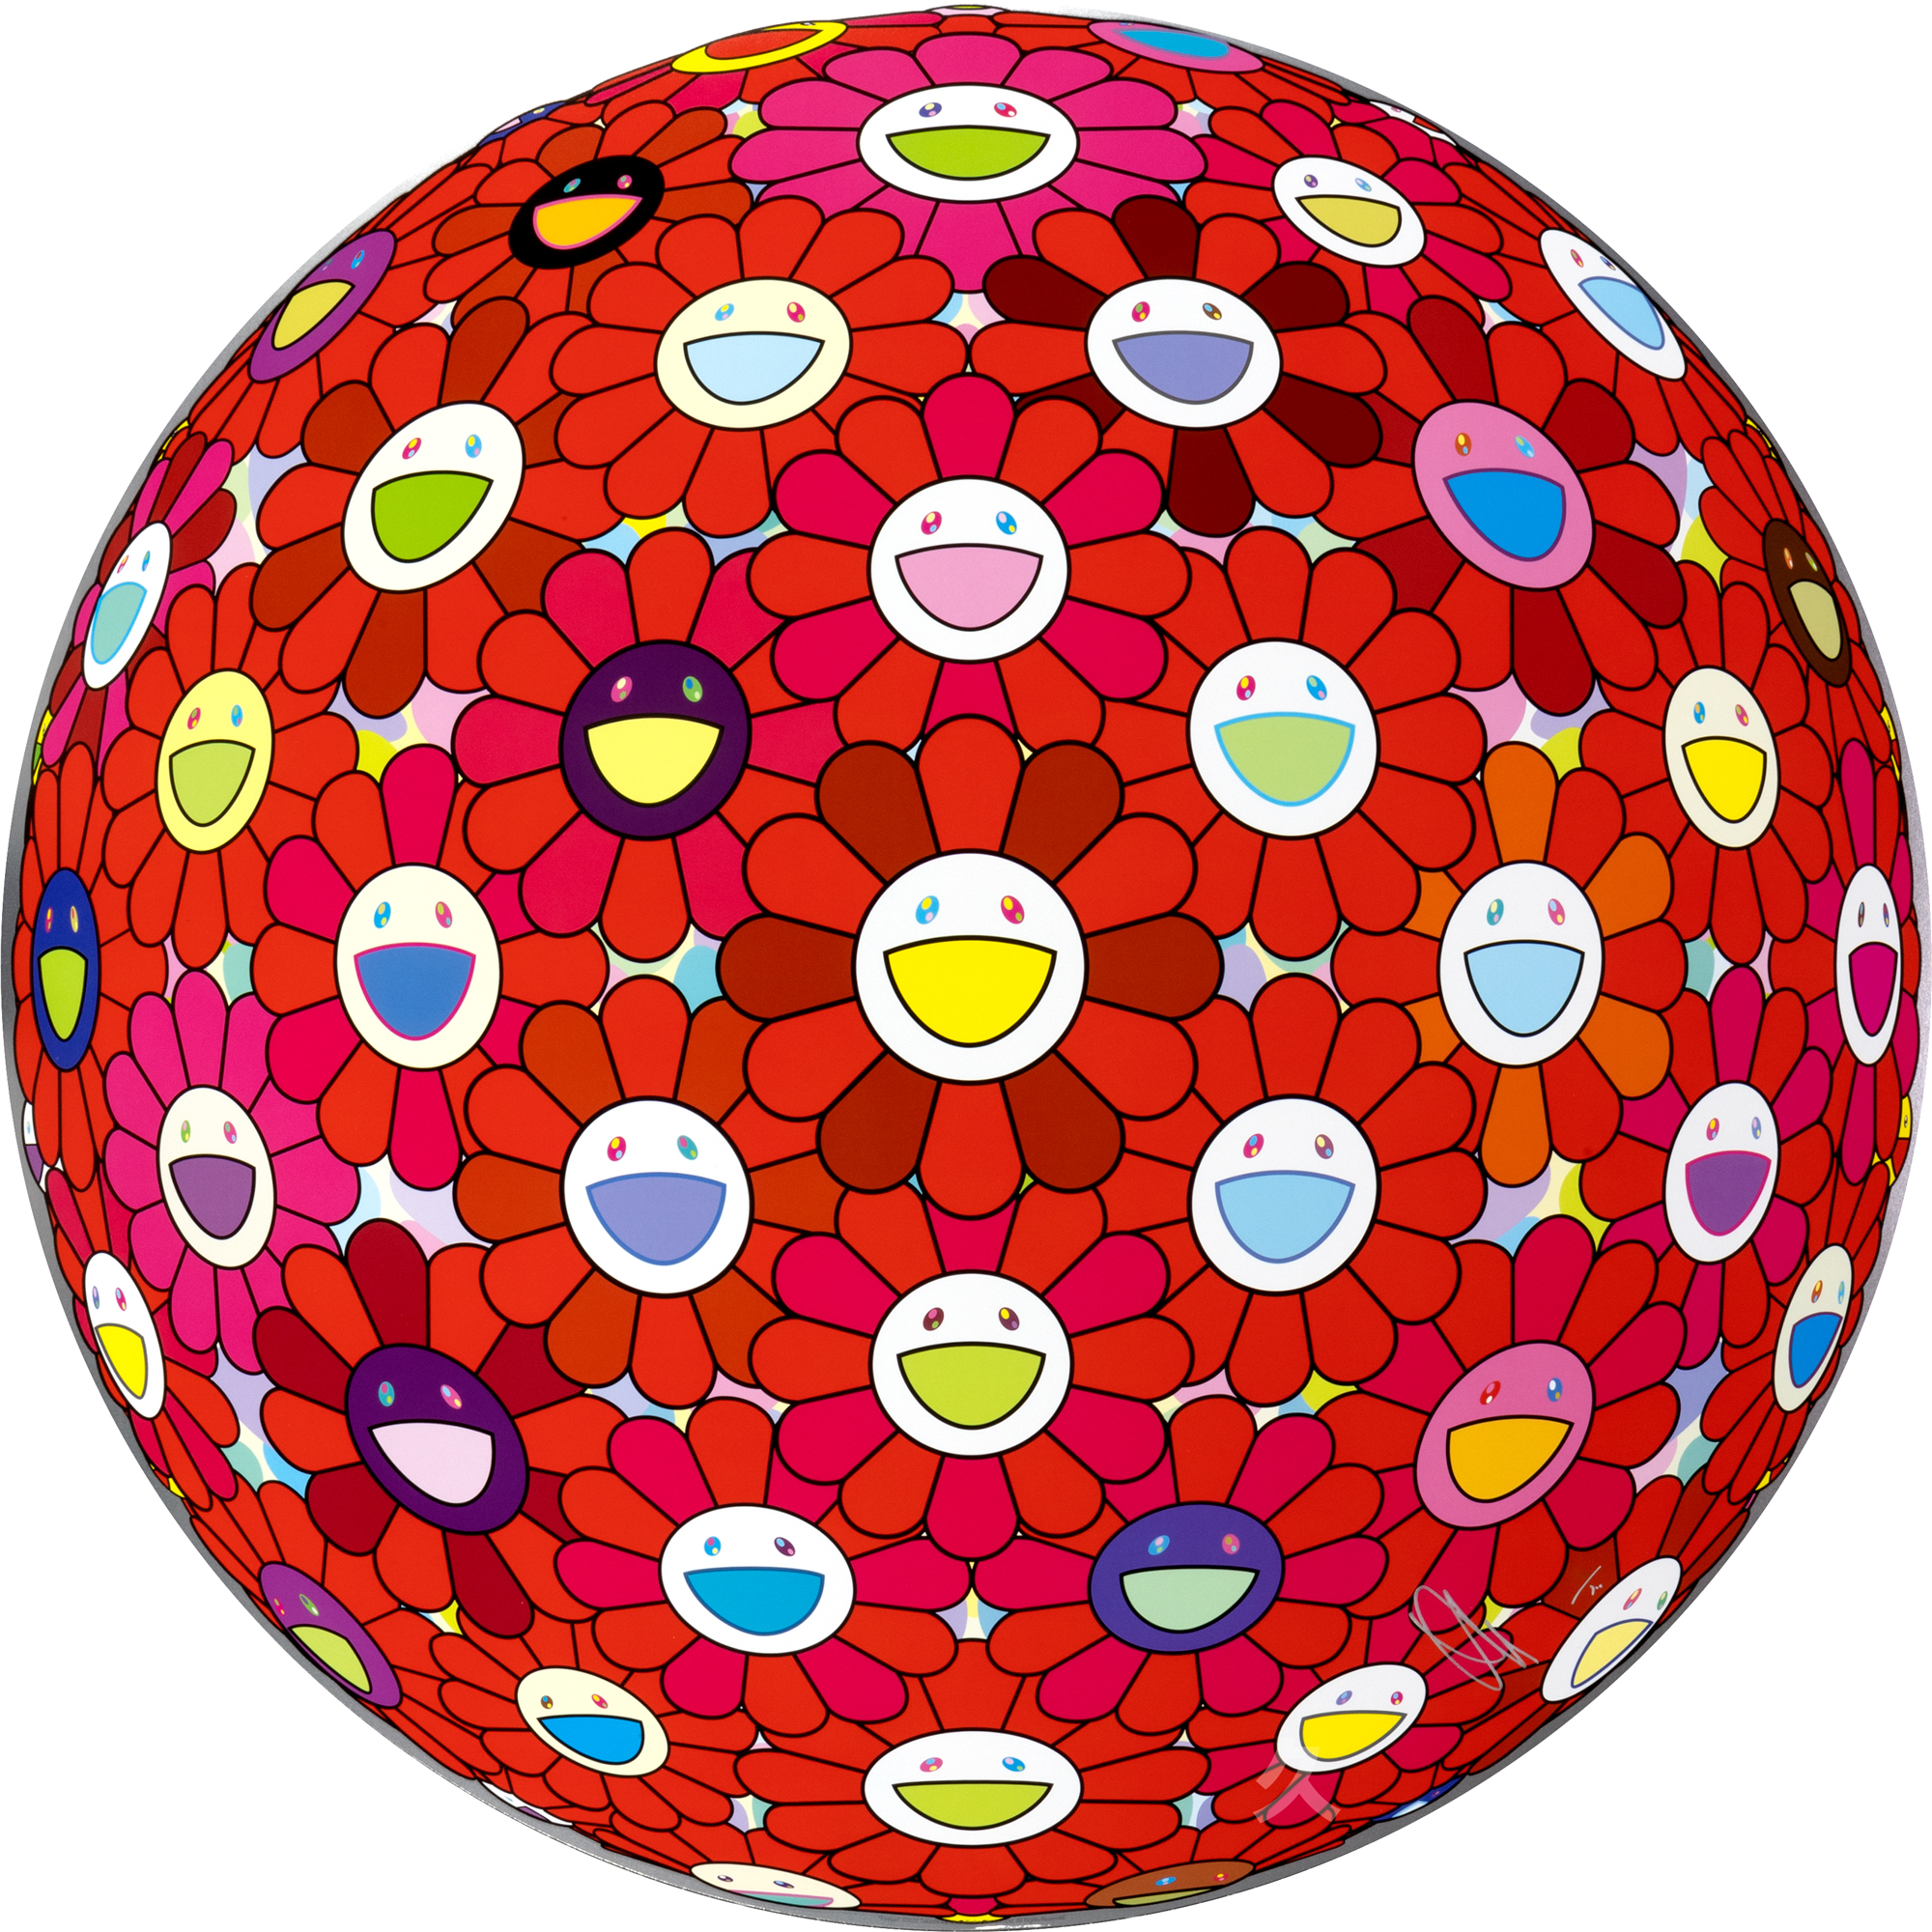 Takashi Murakami, Flowers in Pastel Colors (2022), Available for Sale